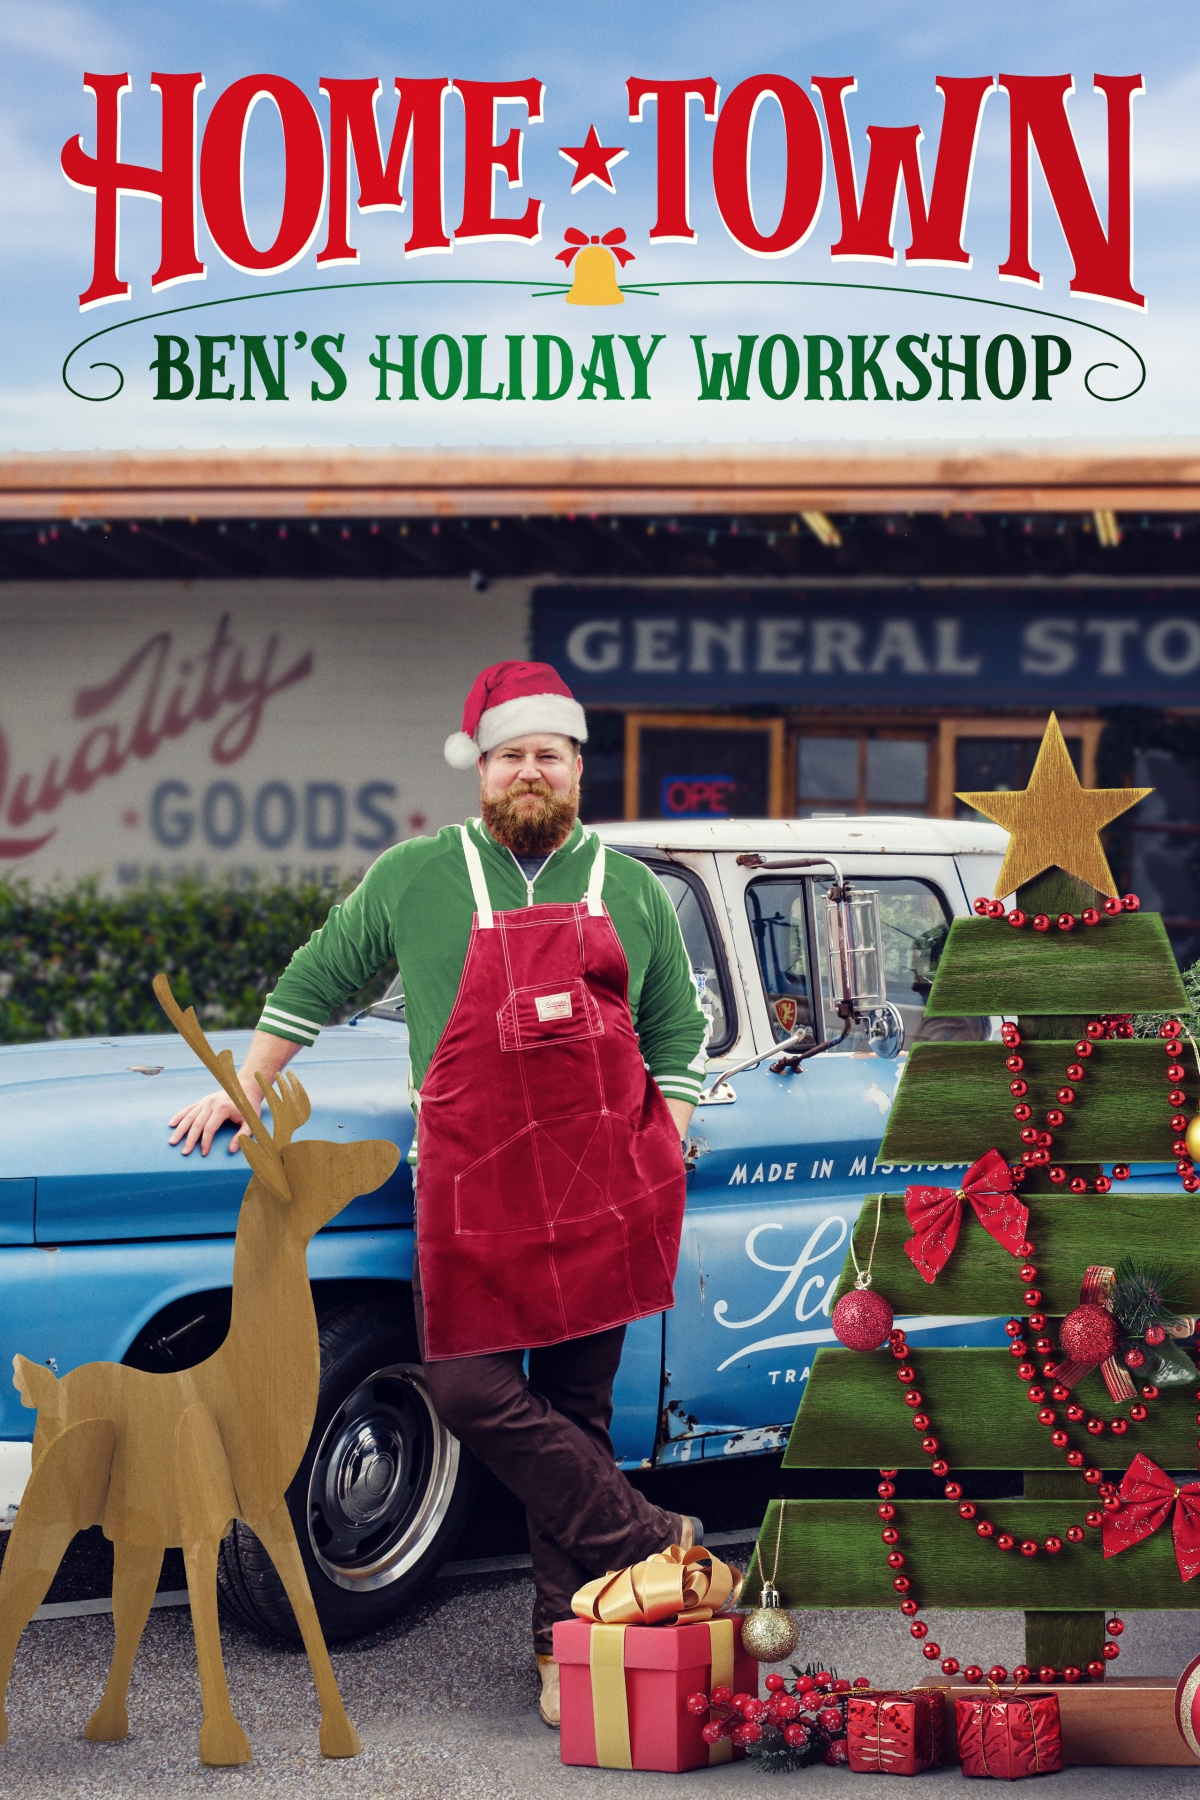 Home Town: Ben's Holiday Workshop